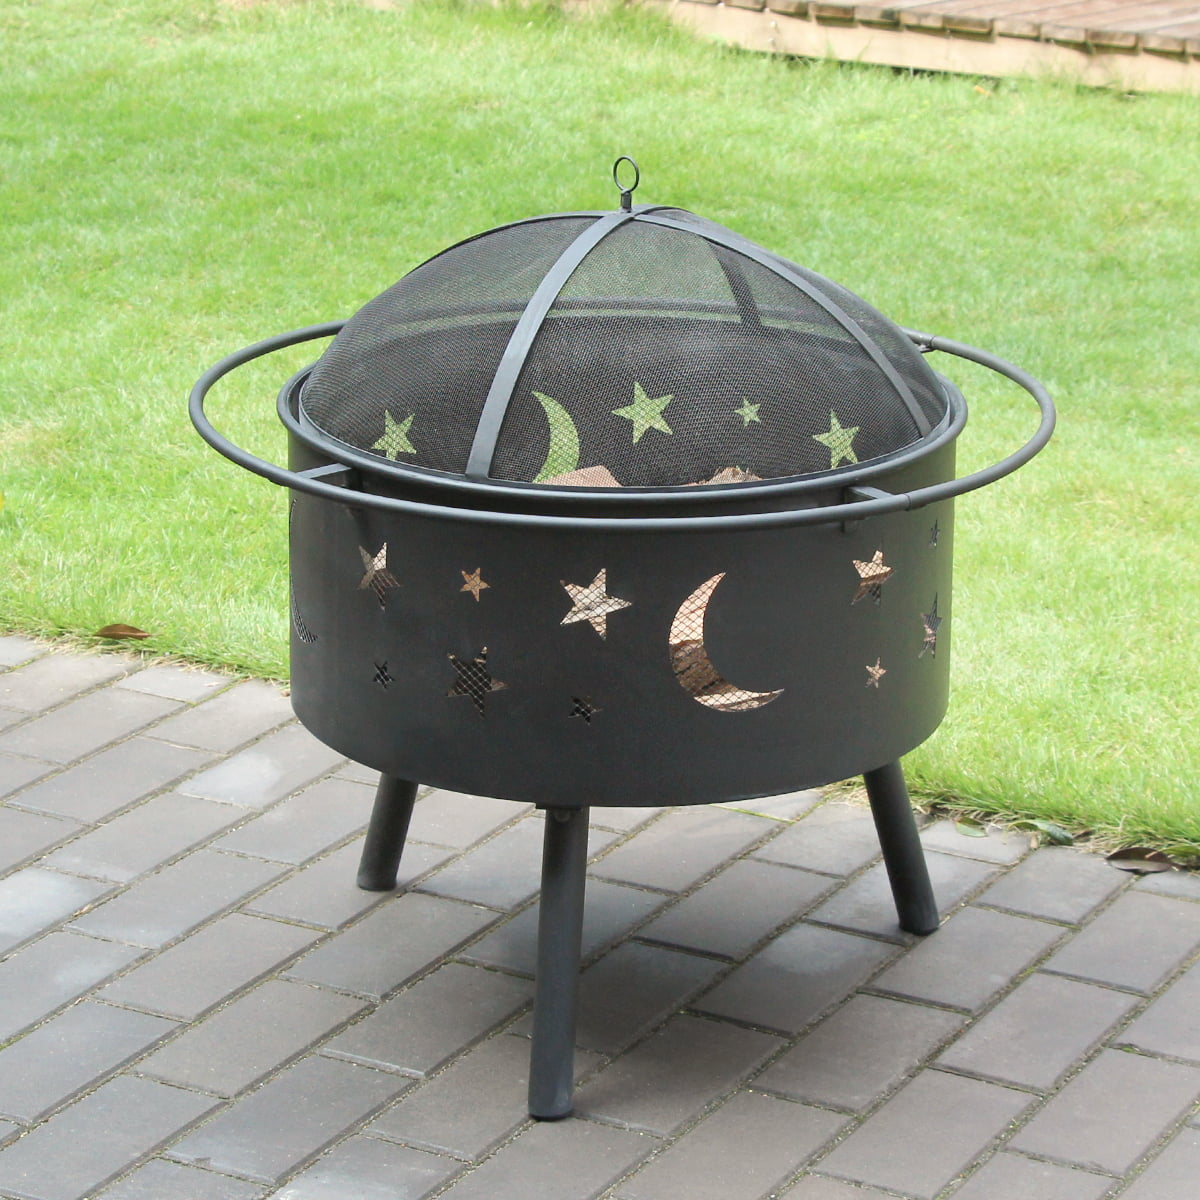 Outdoor Fire Pit With Cooking Grate 30, Fire Pit Cooking Grate Cast Iron